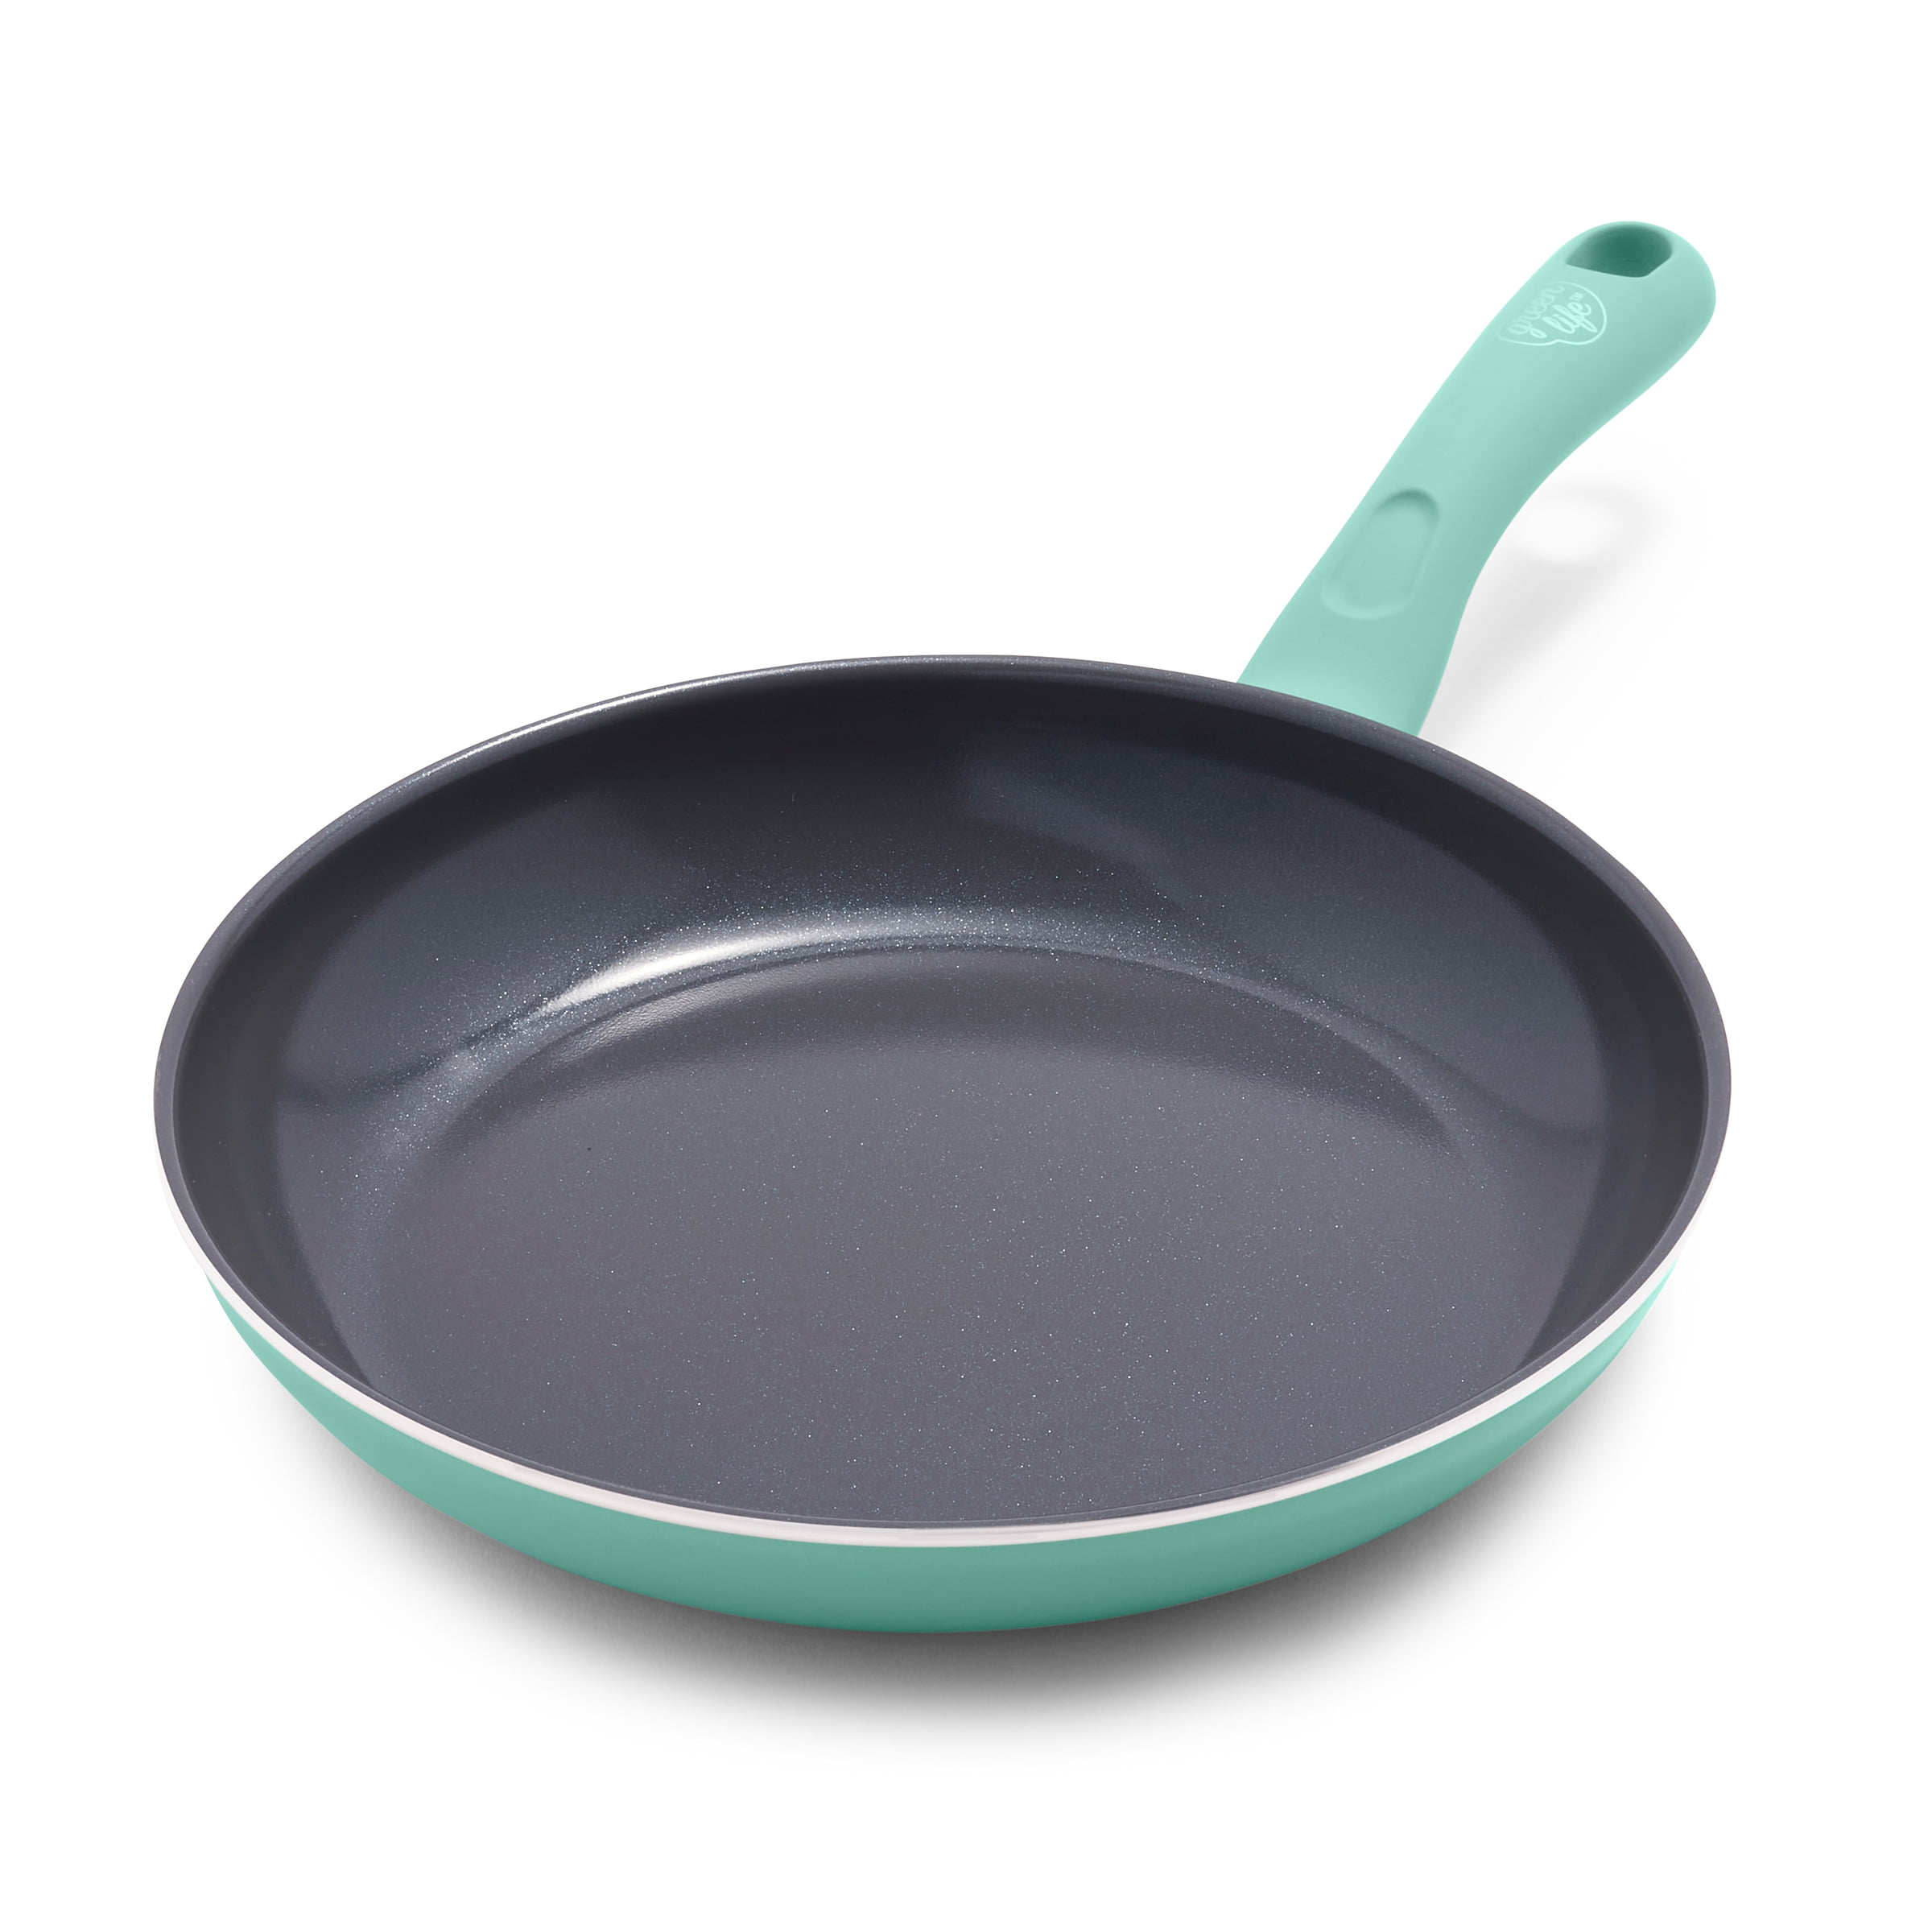 Black 10" Details about   GreenLife Soft Grip Diamond Healthy Ceramic Nonstick Frying Pan 